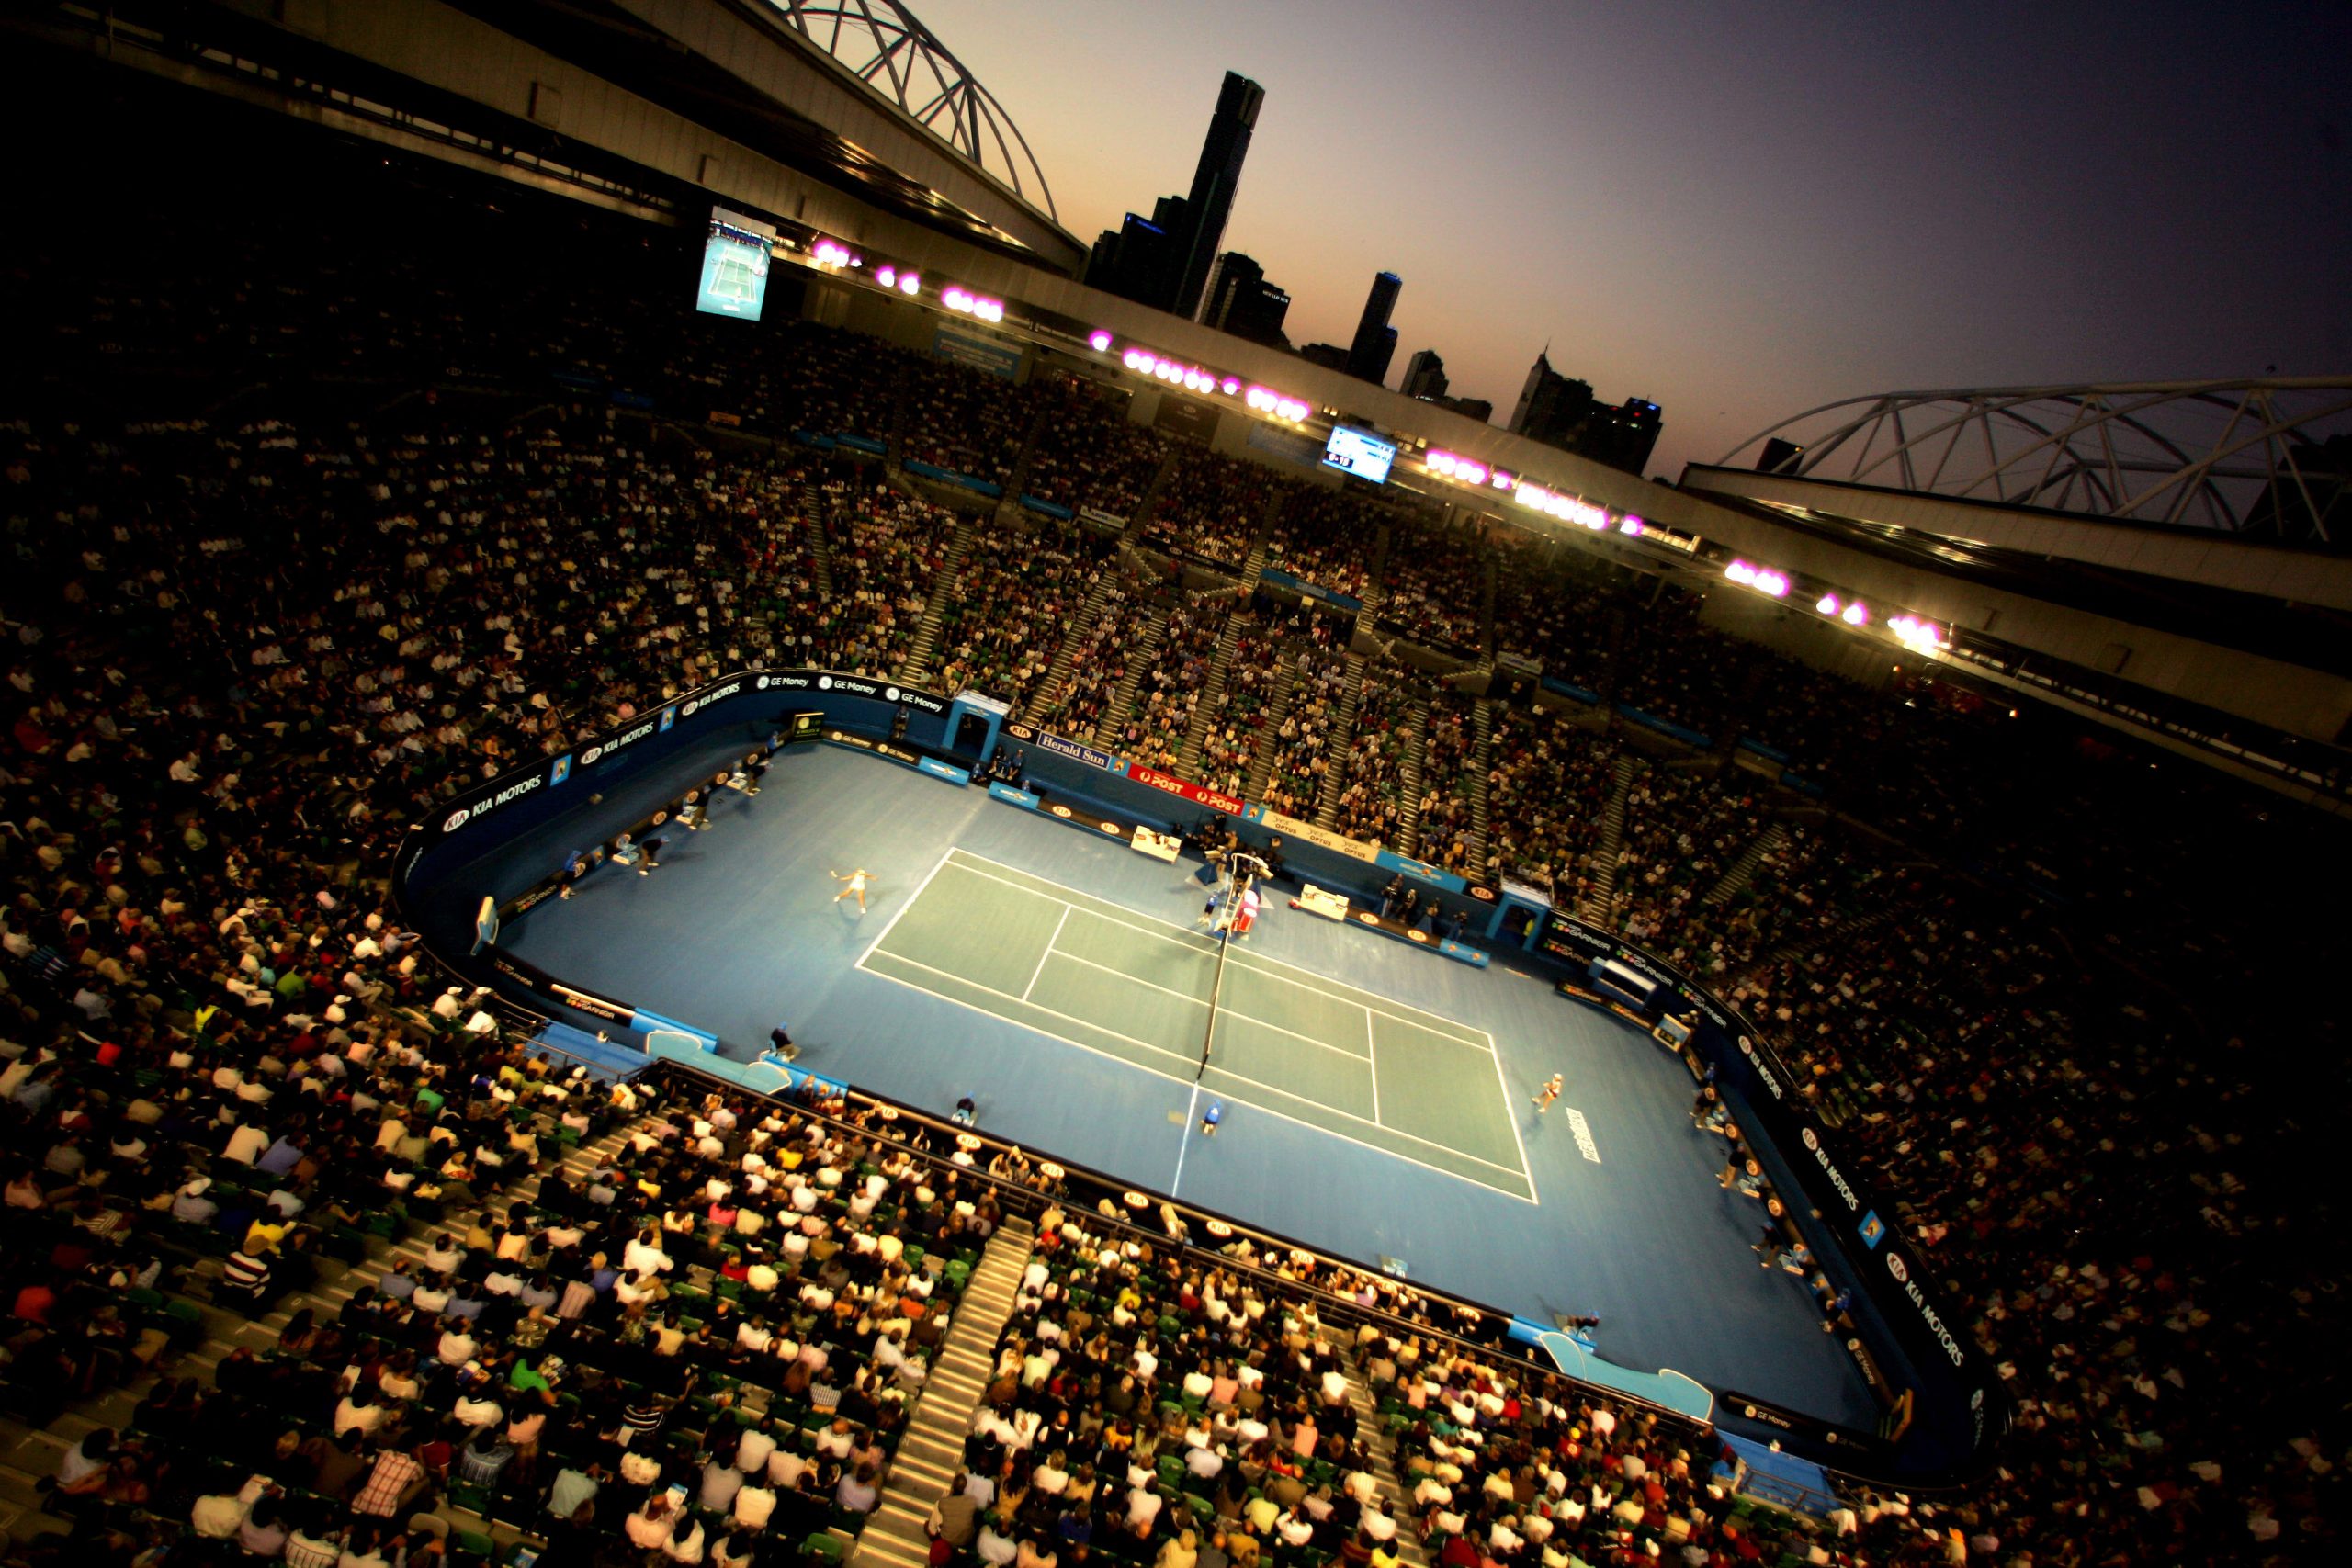 Australian Open to begin on February 8, all players to undergo 14-day quarantine